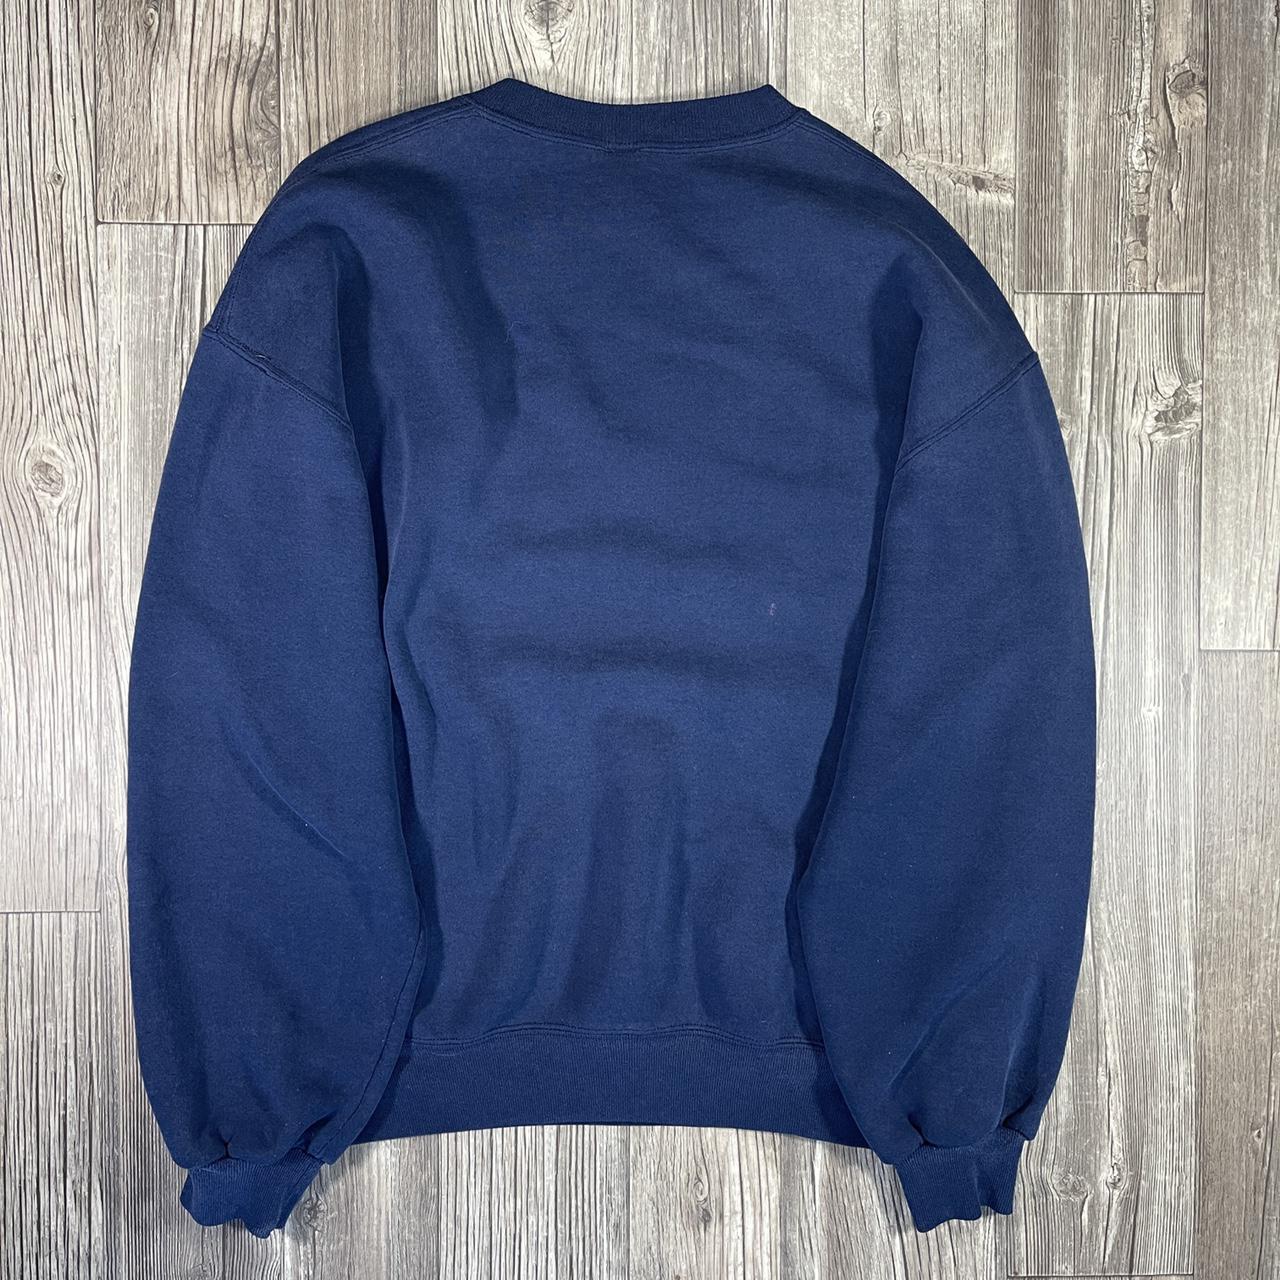 Russell Athletic Men's Navy and White Sweatshirt (4)